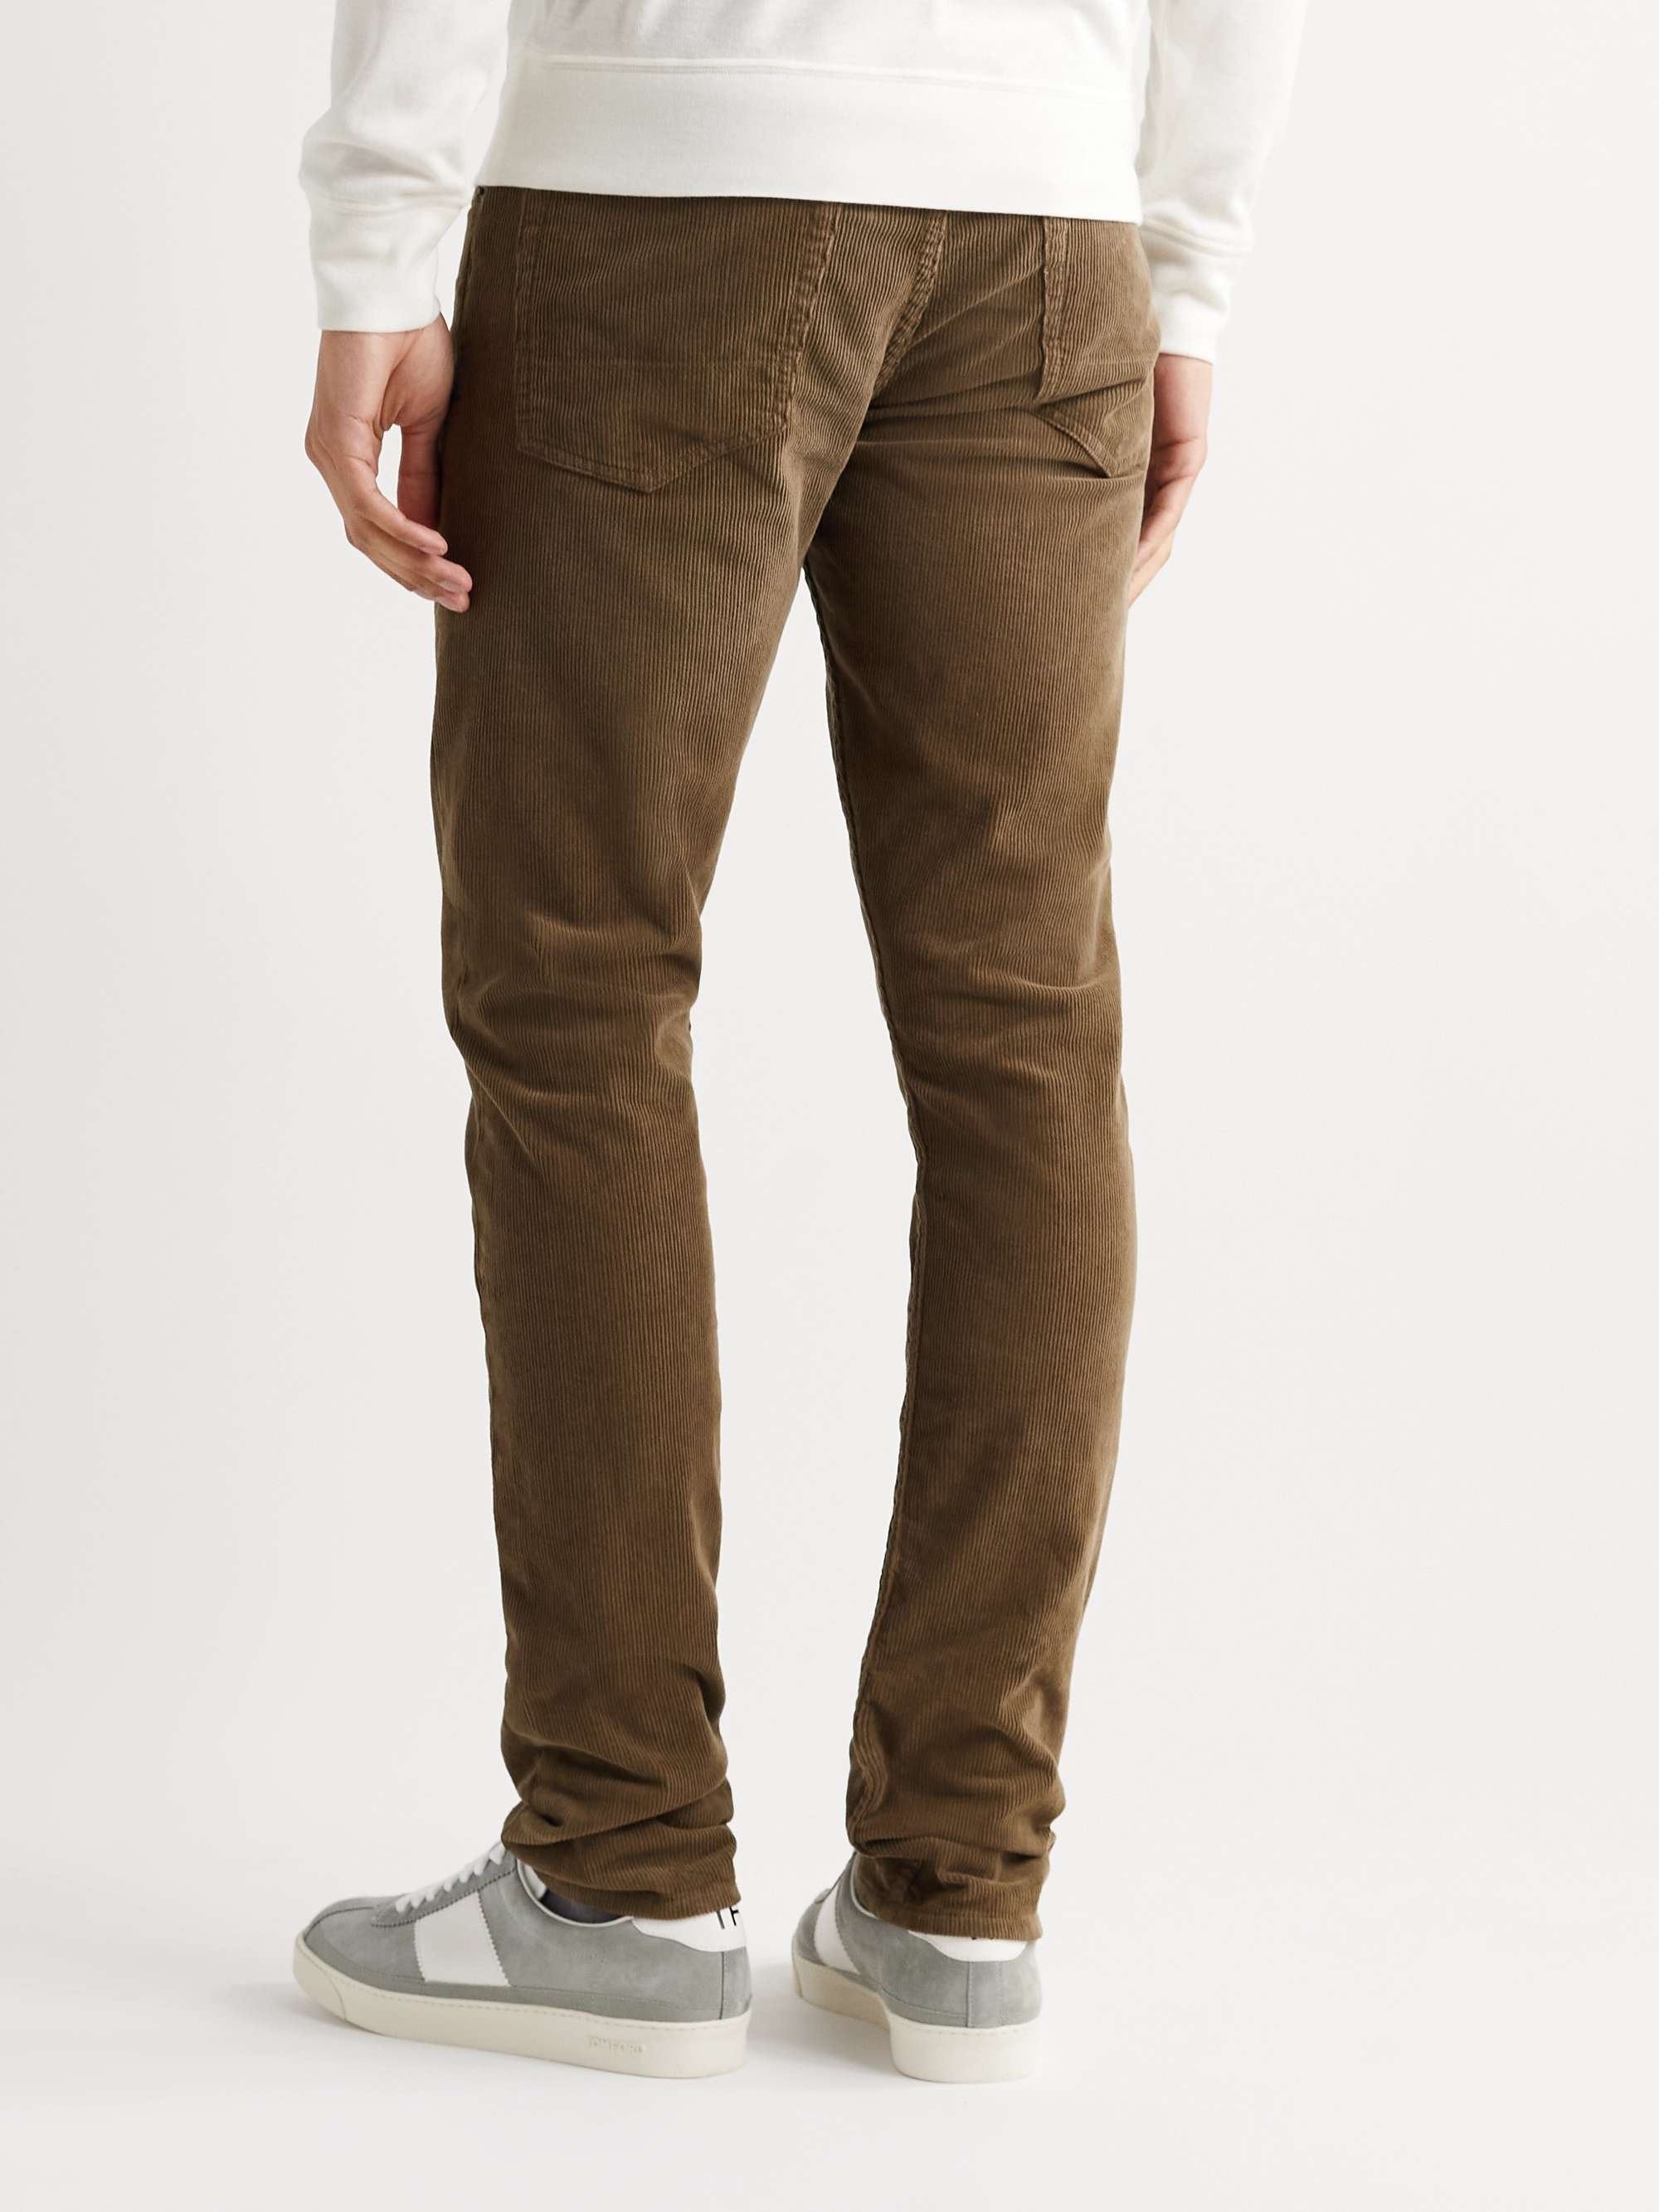 TOM FORD Slim-Fit Cotton-Blend Corduroy Trousers